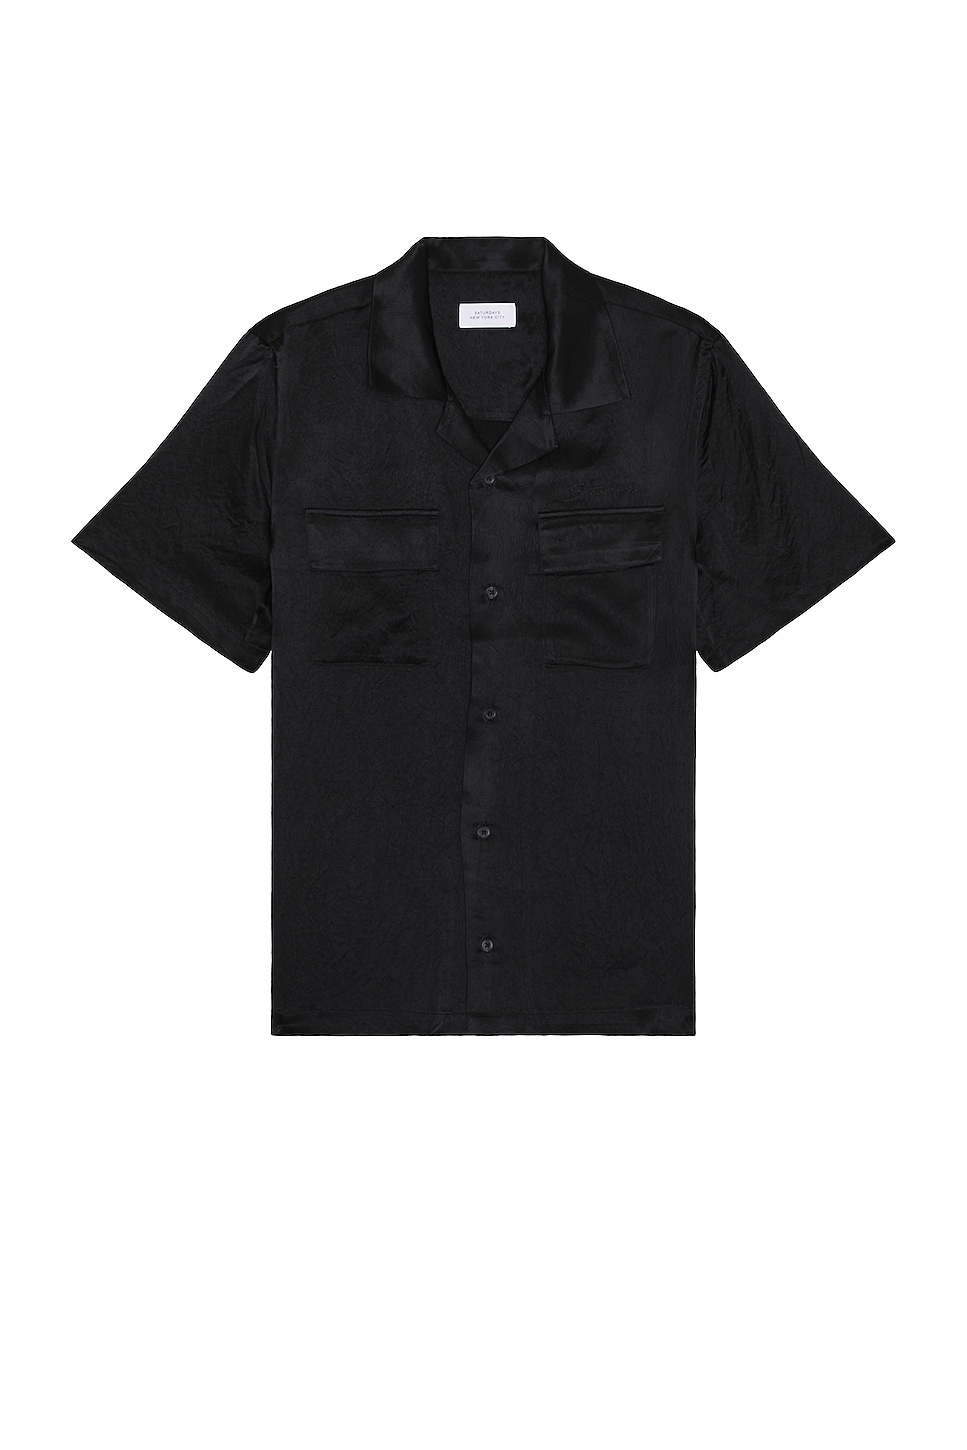 SATURDAYS NYC Canty Crinkled Satin Shirt in Black